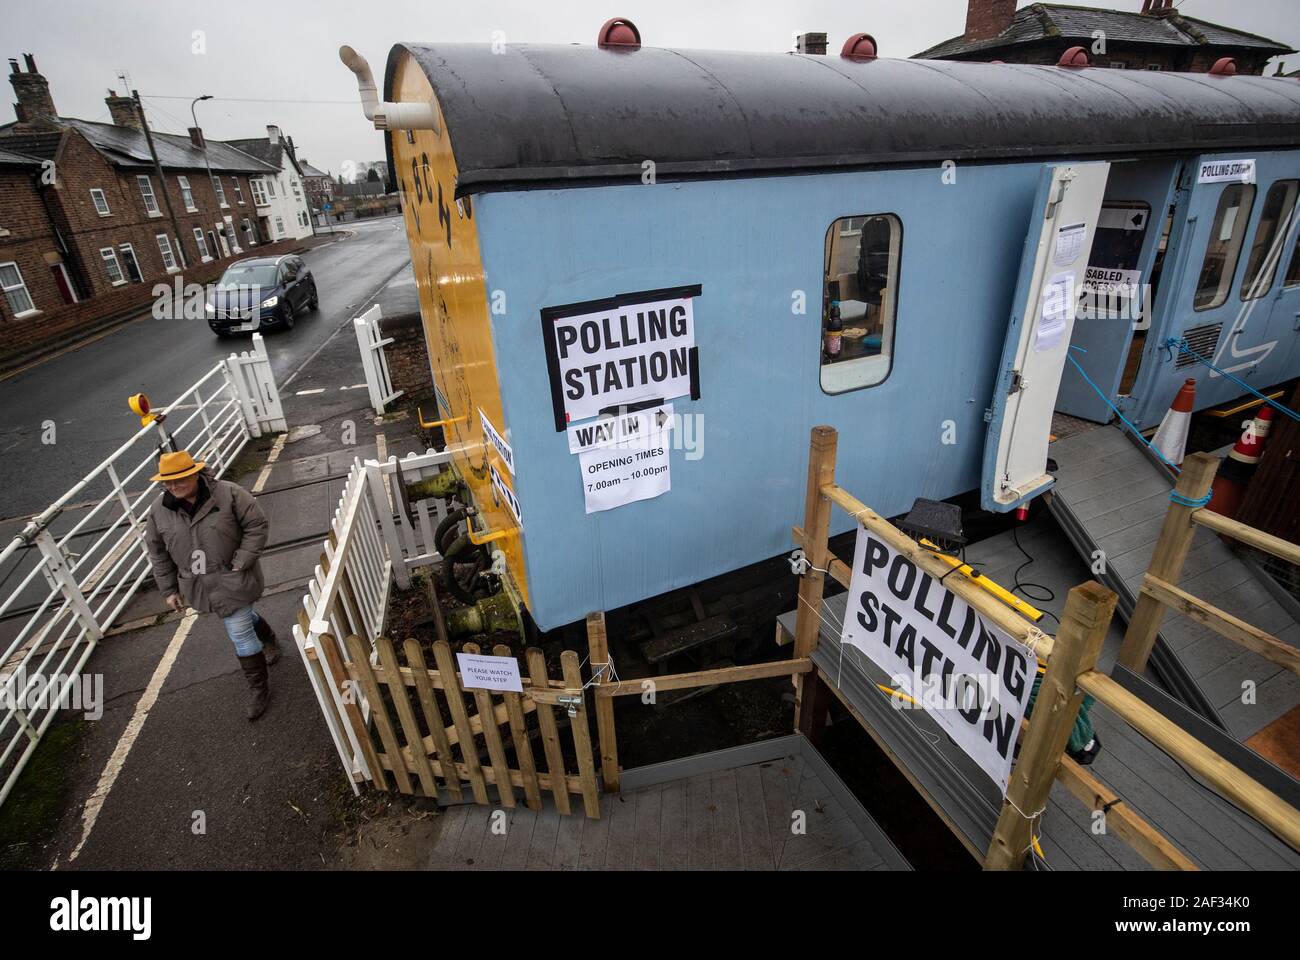 A woman walks past a polling station in a railway carriage in Leeming Bar, North Yorkshire, as voters go to the polls in what has been billed as the most important General Election in a generation. Stock Photo